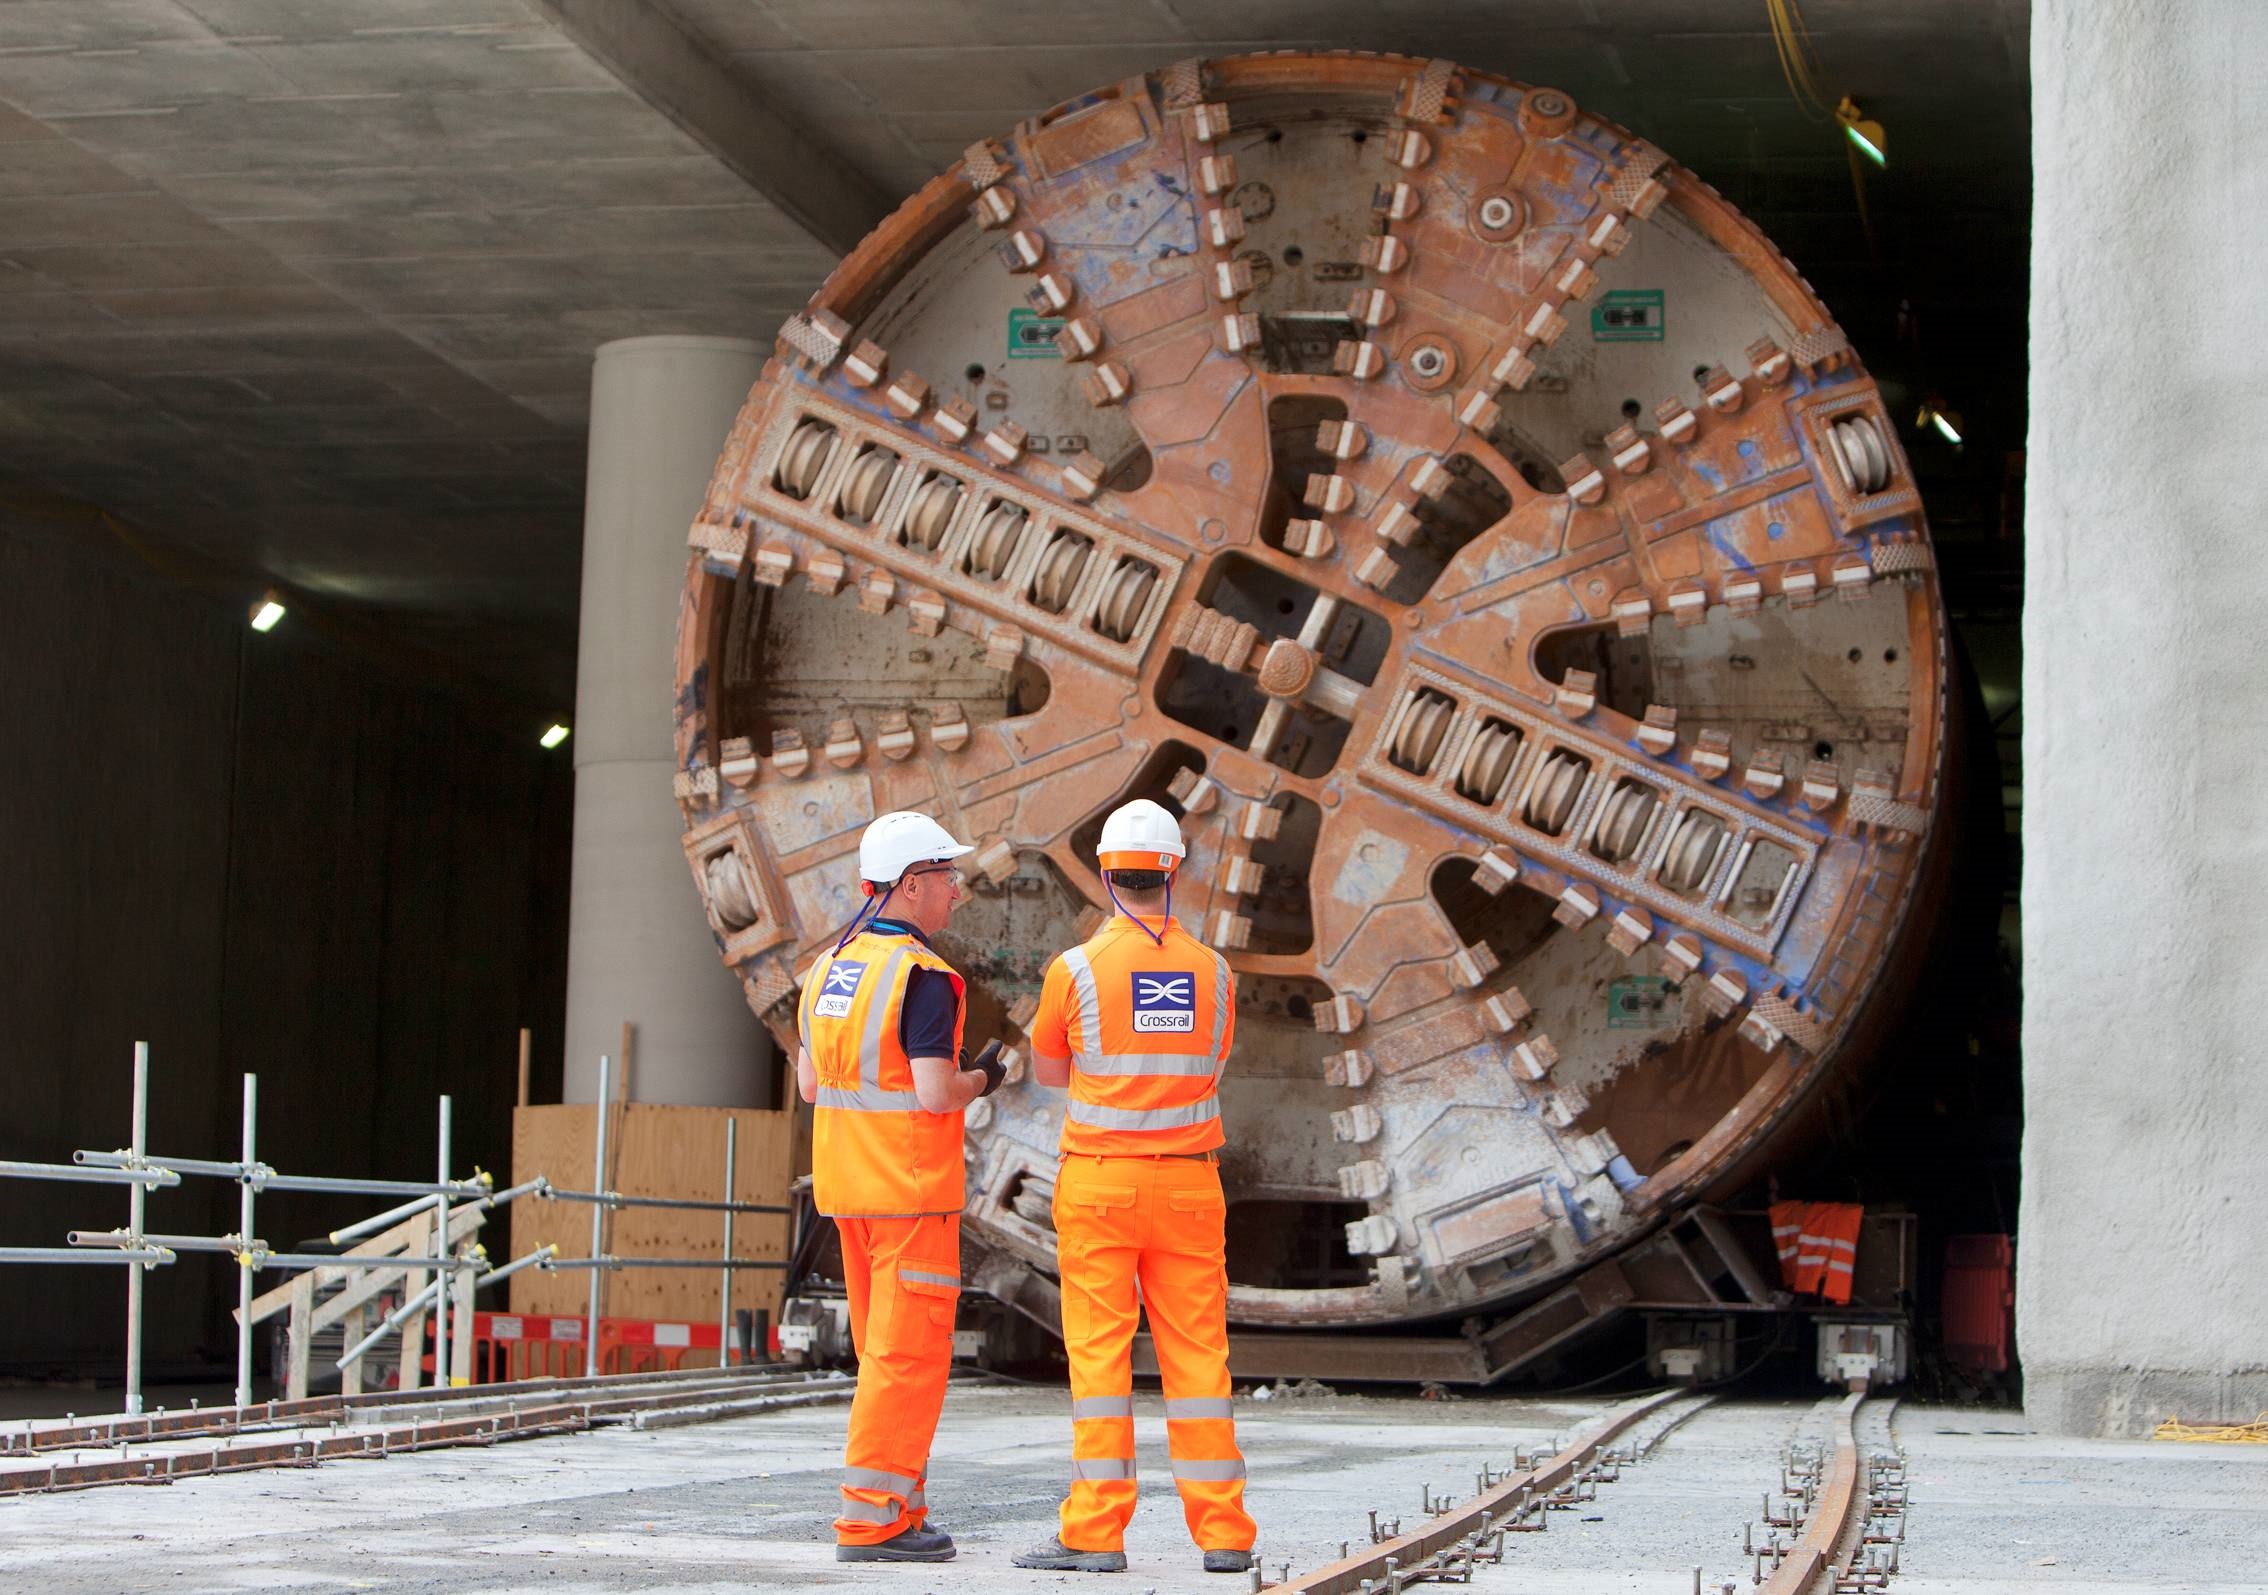 Three firms face prosecution over Crossrail worker death and injuries